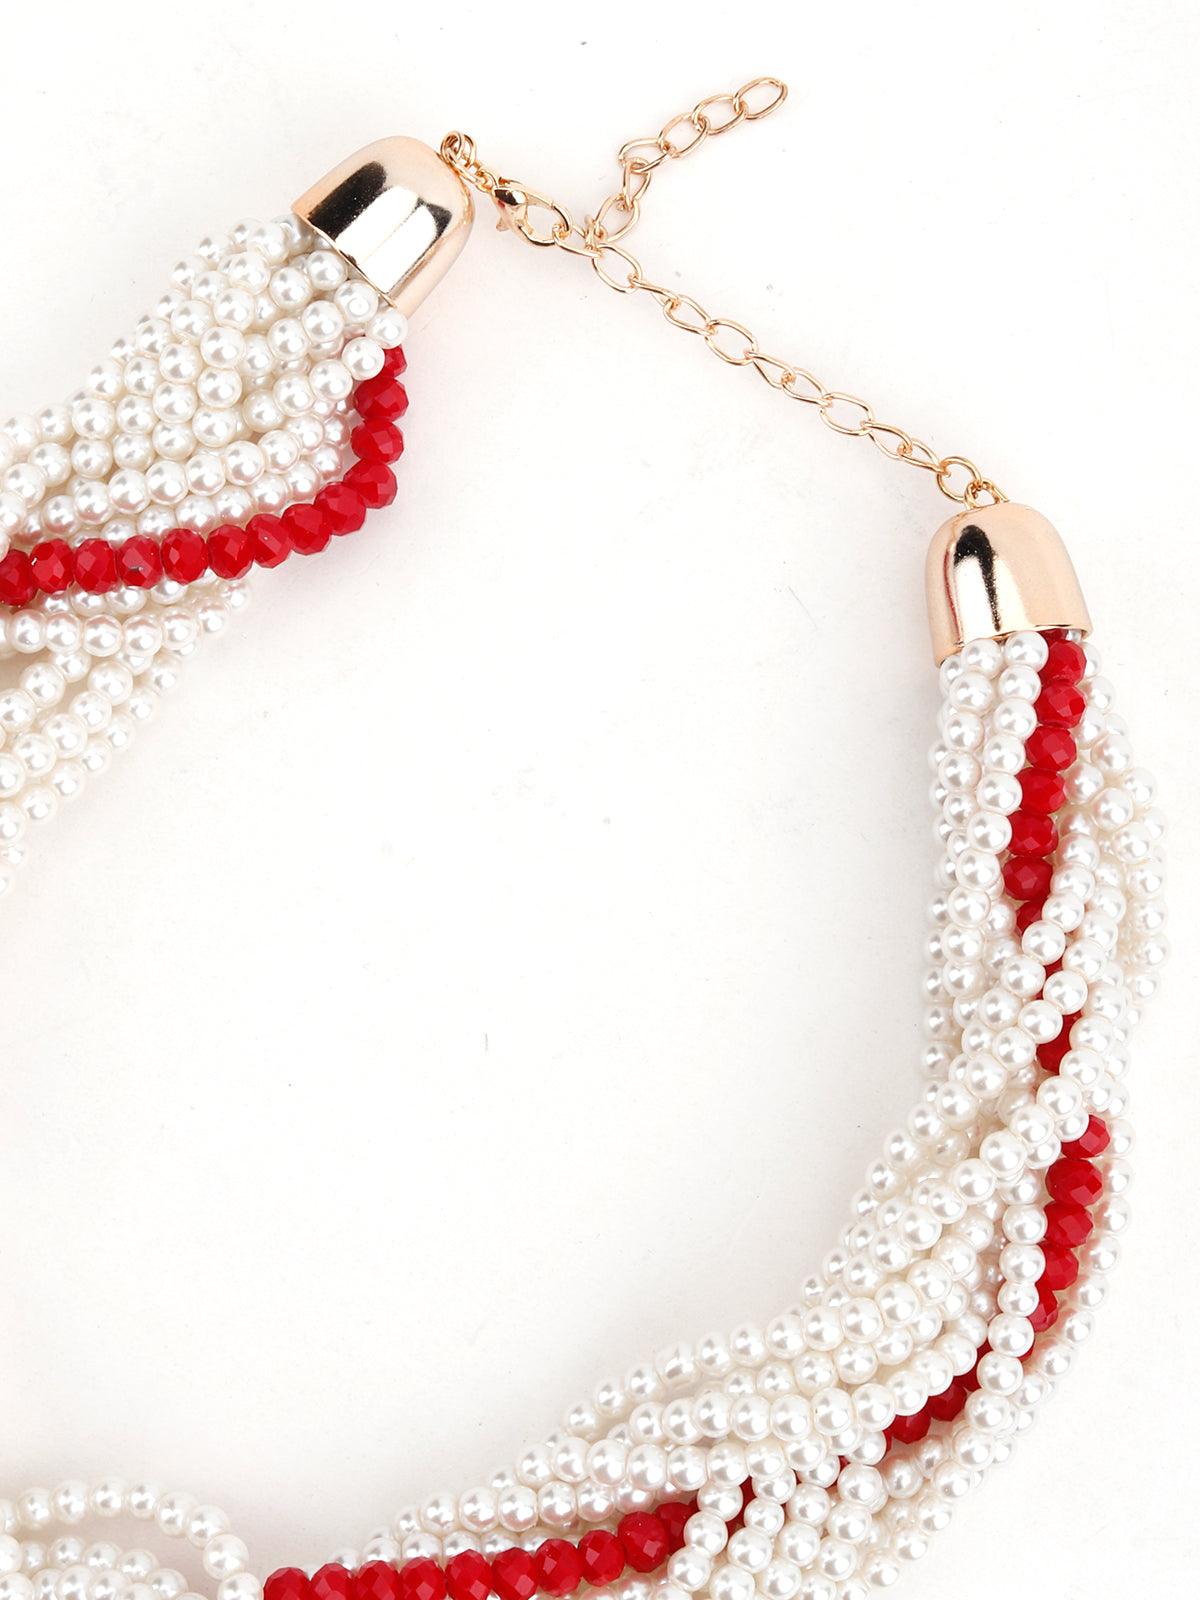 White-Red Graceful Necklace - Odette